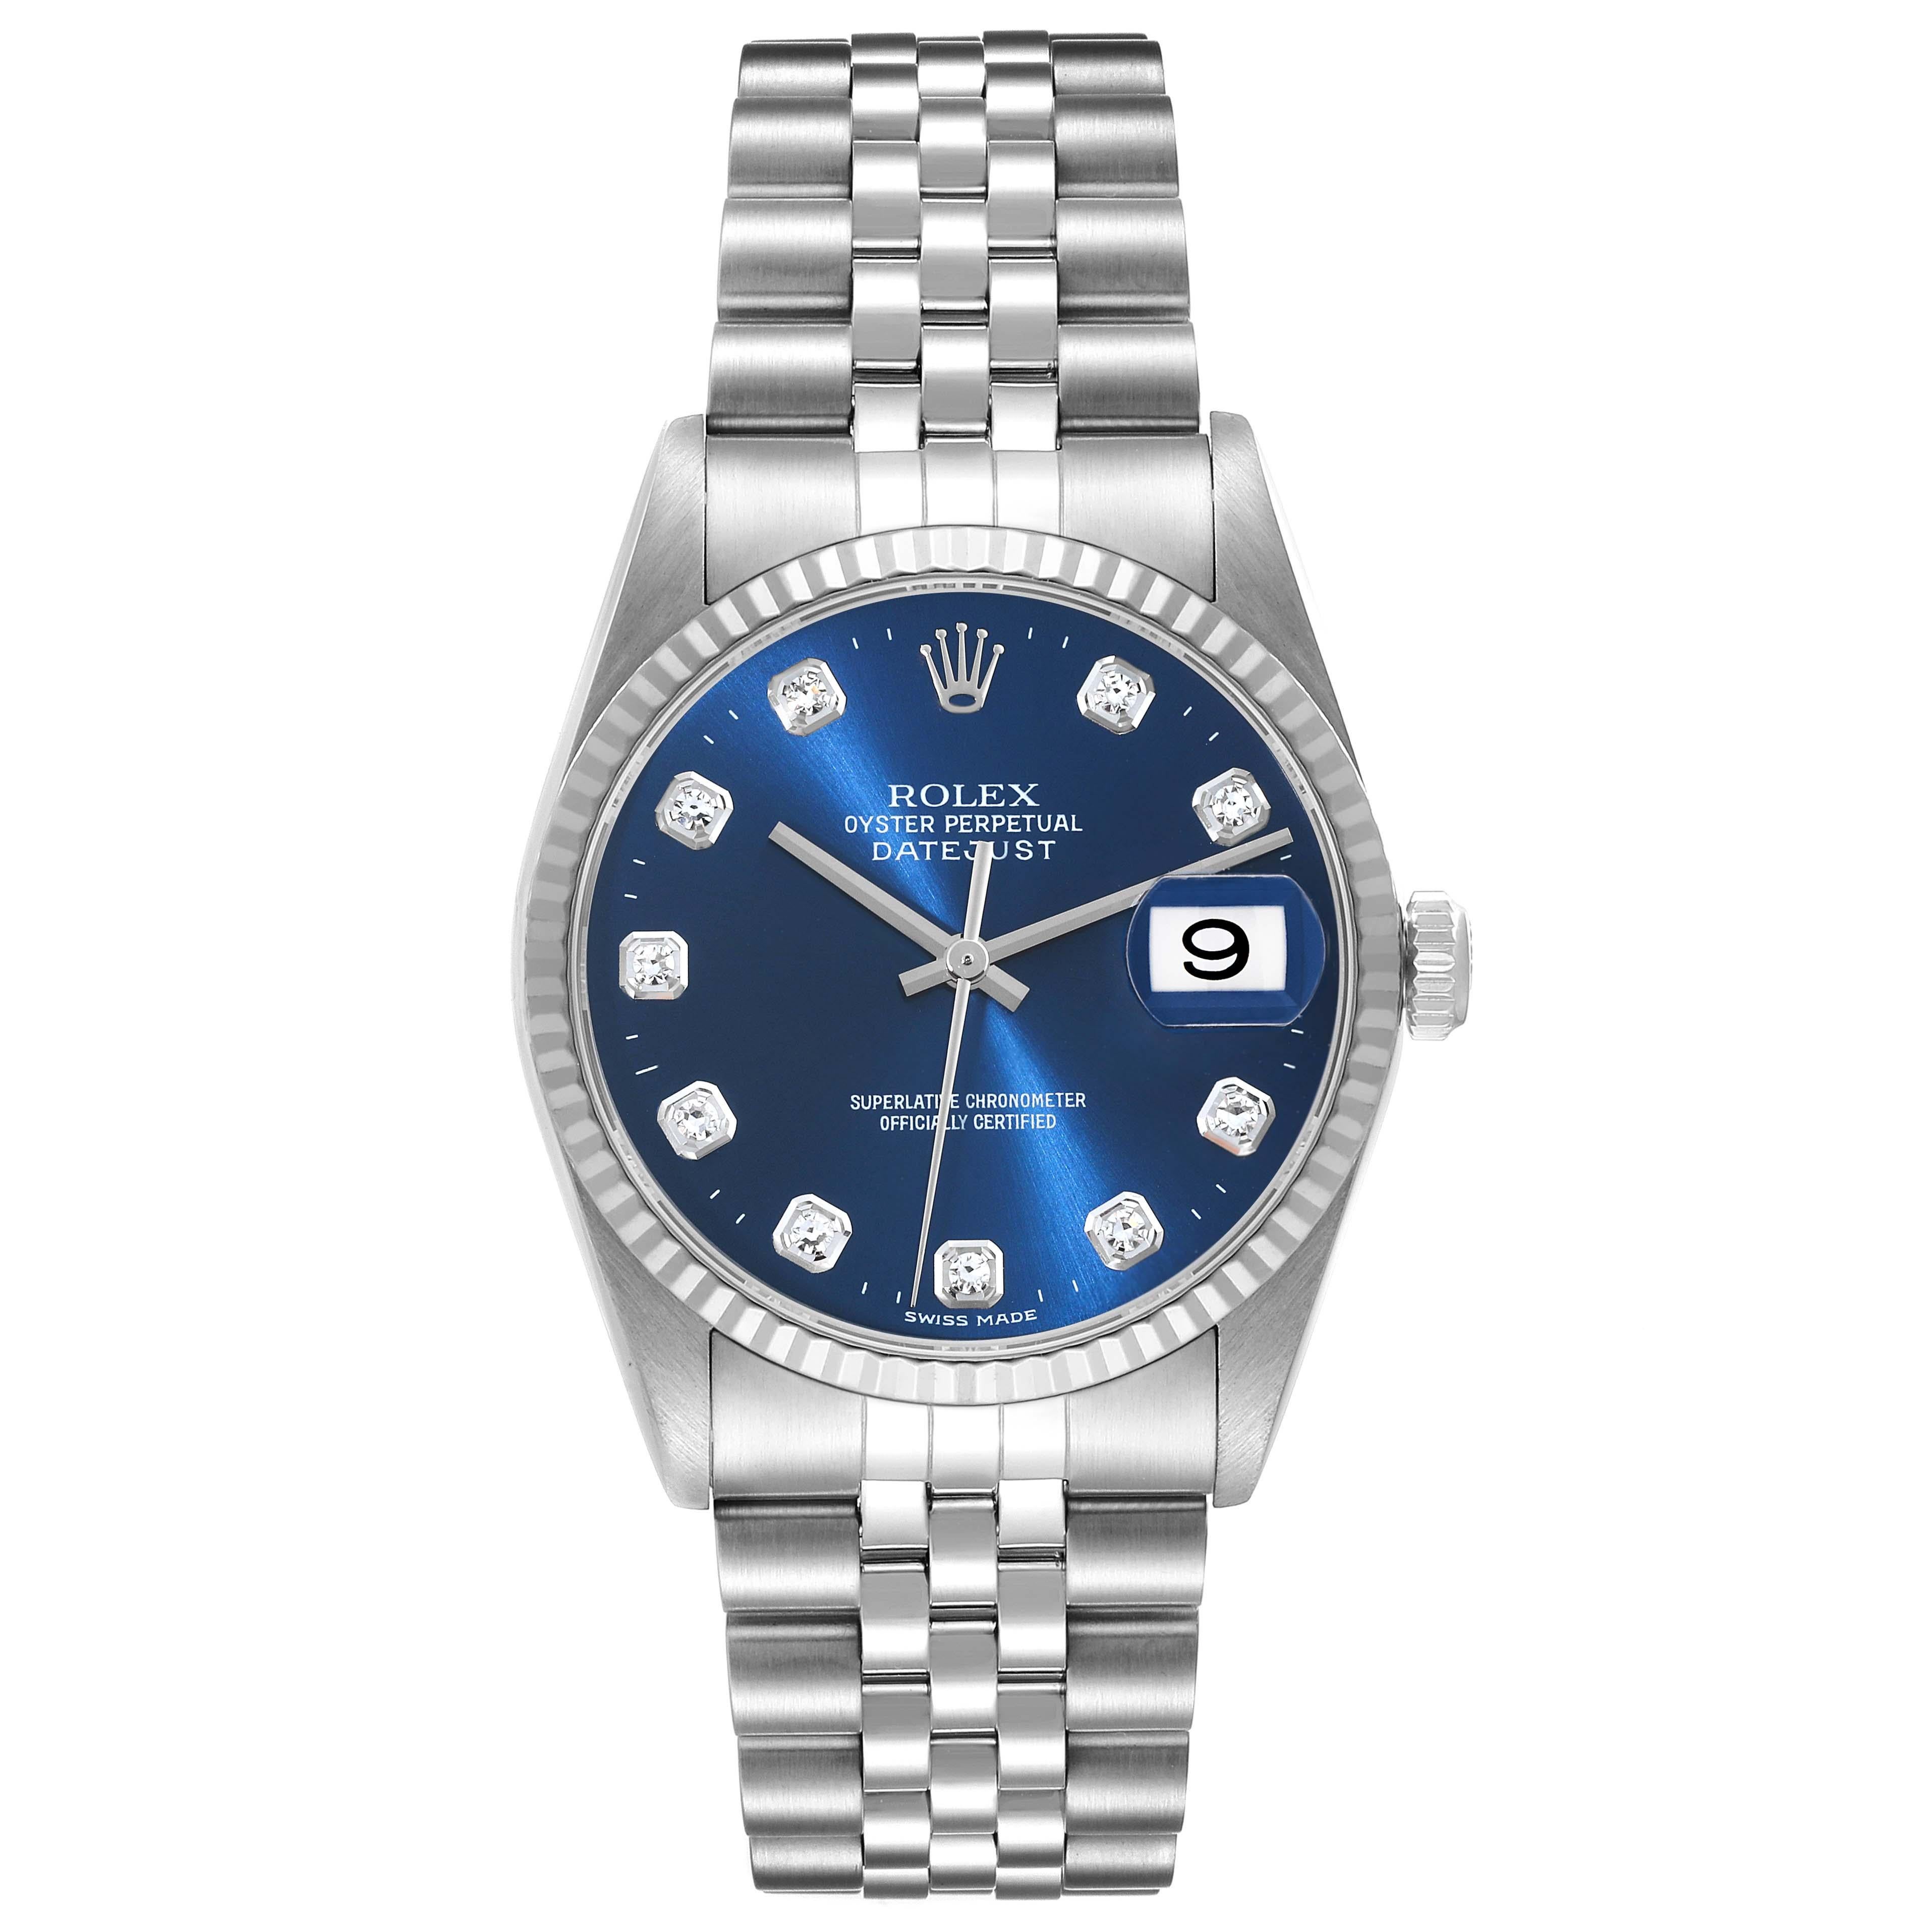 Rolex Datejust Blue Diamond Dial Steel White Gold Mens Watch 16234. Officially certified chronometer automatic self-winding movement. Stainless steel oyster case 36.0 mm in diameter. Rolex logo on a crown. 18k white gold fluted bezel. Scratch